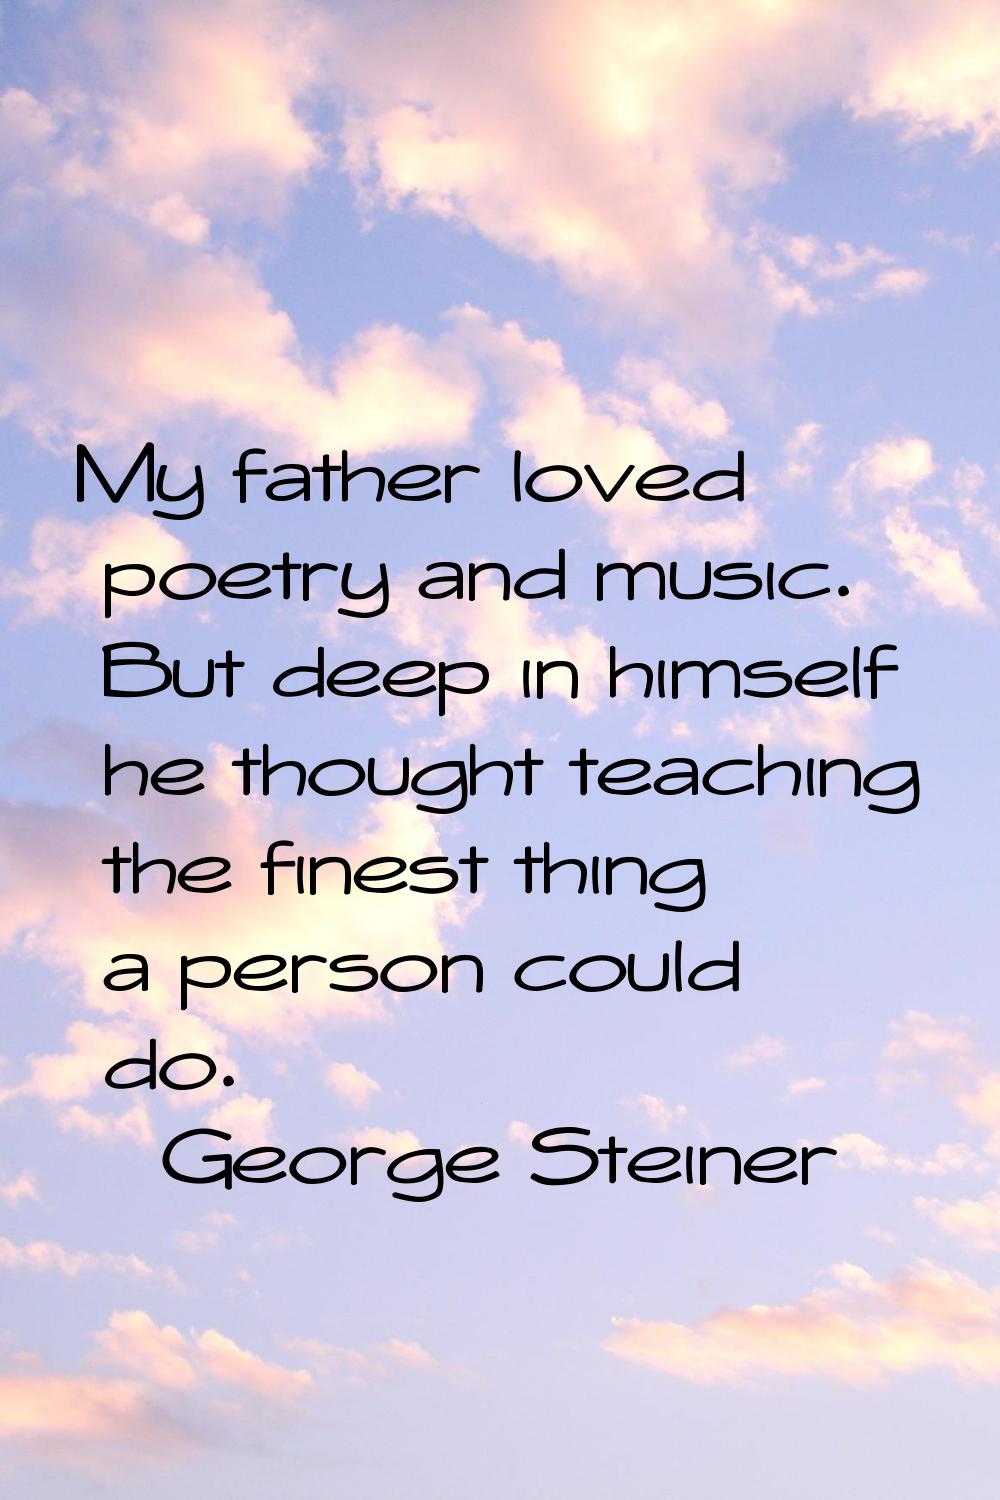 My father loved poetry and music. But deep in himself he thought teaching the finest thing a person